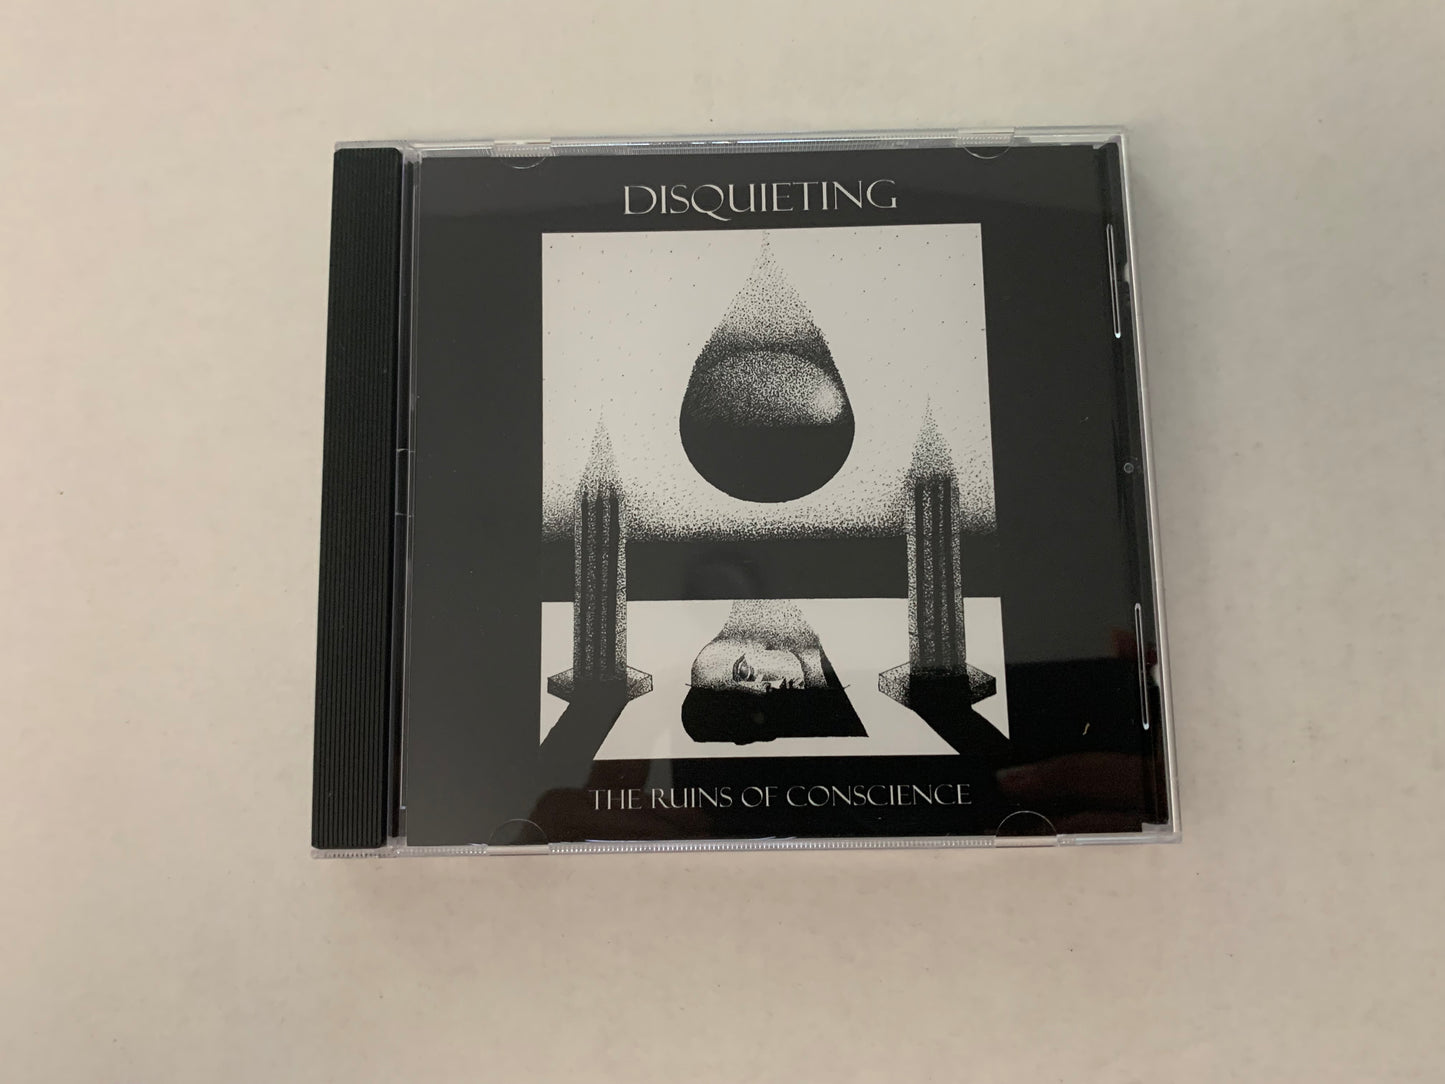 Disquieting - The Ruins of Conscience [Fantasy Synth] (Self-Released - CD - 4/3/21)